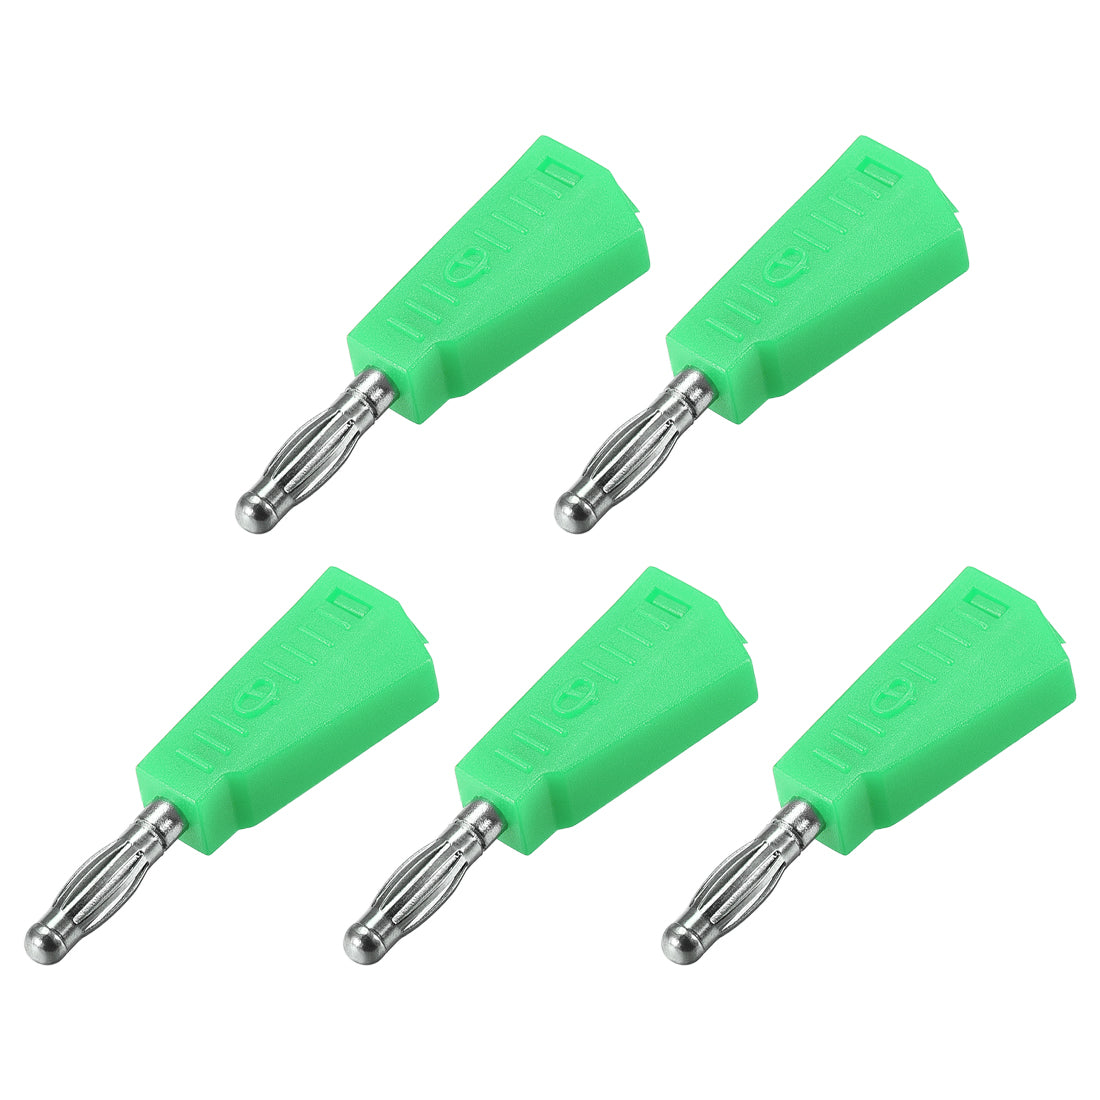 uxcell Uxcell 4mm Banana Speaker Wire Cable Plugs Connectors Green 20A Jack Connector 5pcs